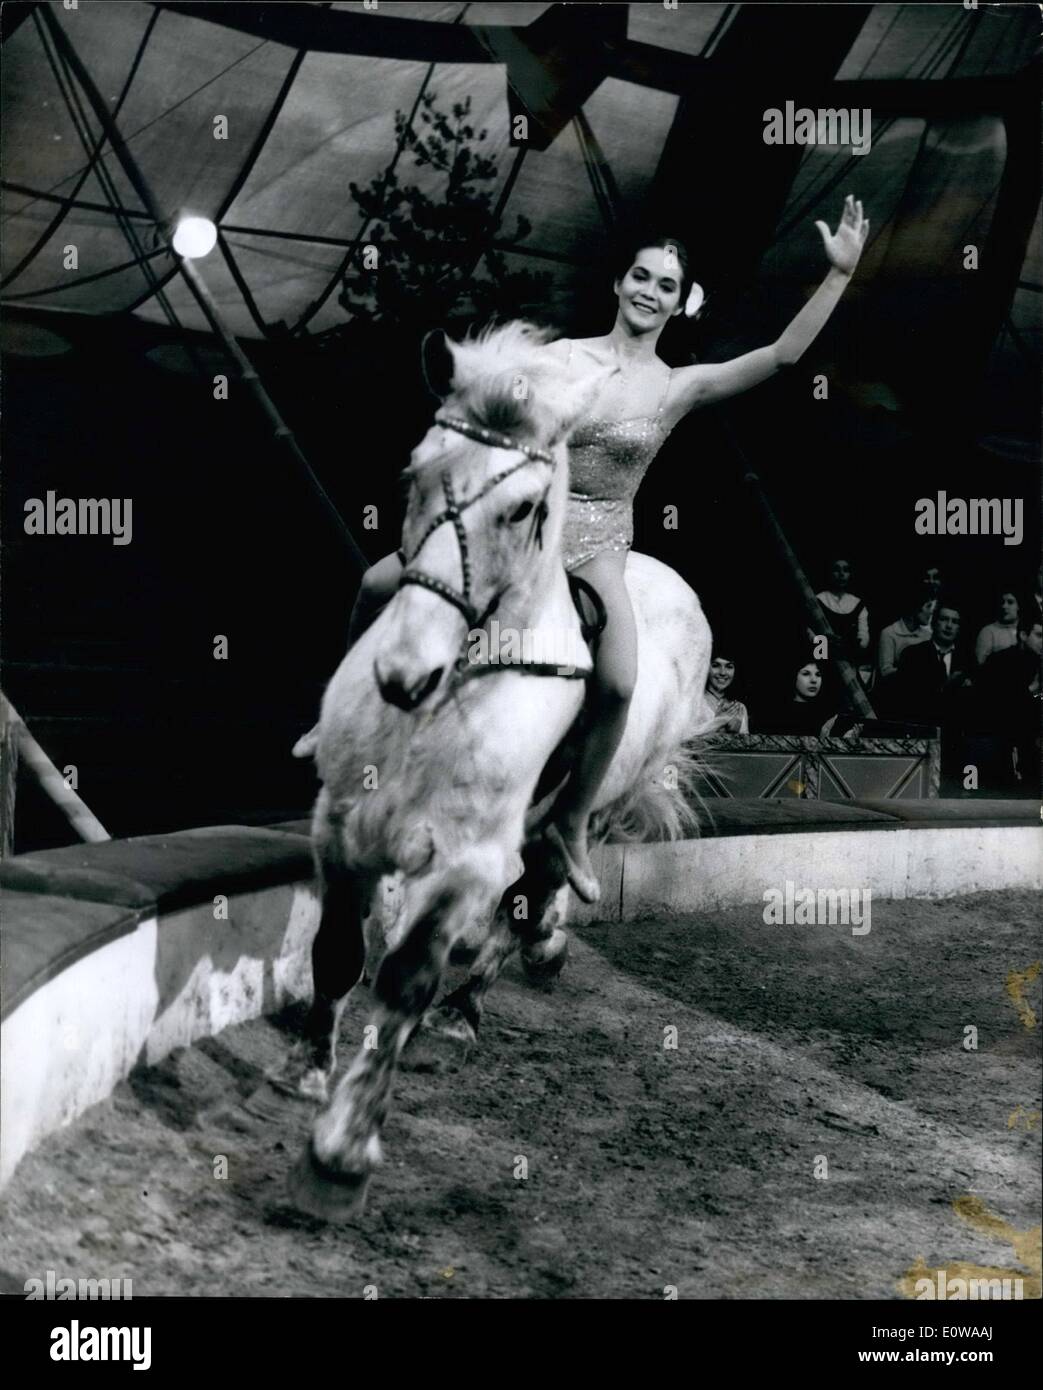 Mar. 10, 1962 - 10-3-62 Nancy Kwan does bareback riding act. Hong Kong Nancy Kwan, starring as an Italian in the film The Main Attraction being made at Sheeperton does a daring bareback riding act, both Nancy and the horse are bareback! Nancy, 22, who leaps on and off the horse's back as it trots around the ring, was caught by experts from the Bertram Mills Circus. Photo Shows: Riding high Nancy Kwan gives a confident smile during filming yesterday. Stock Photo